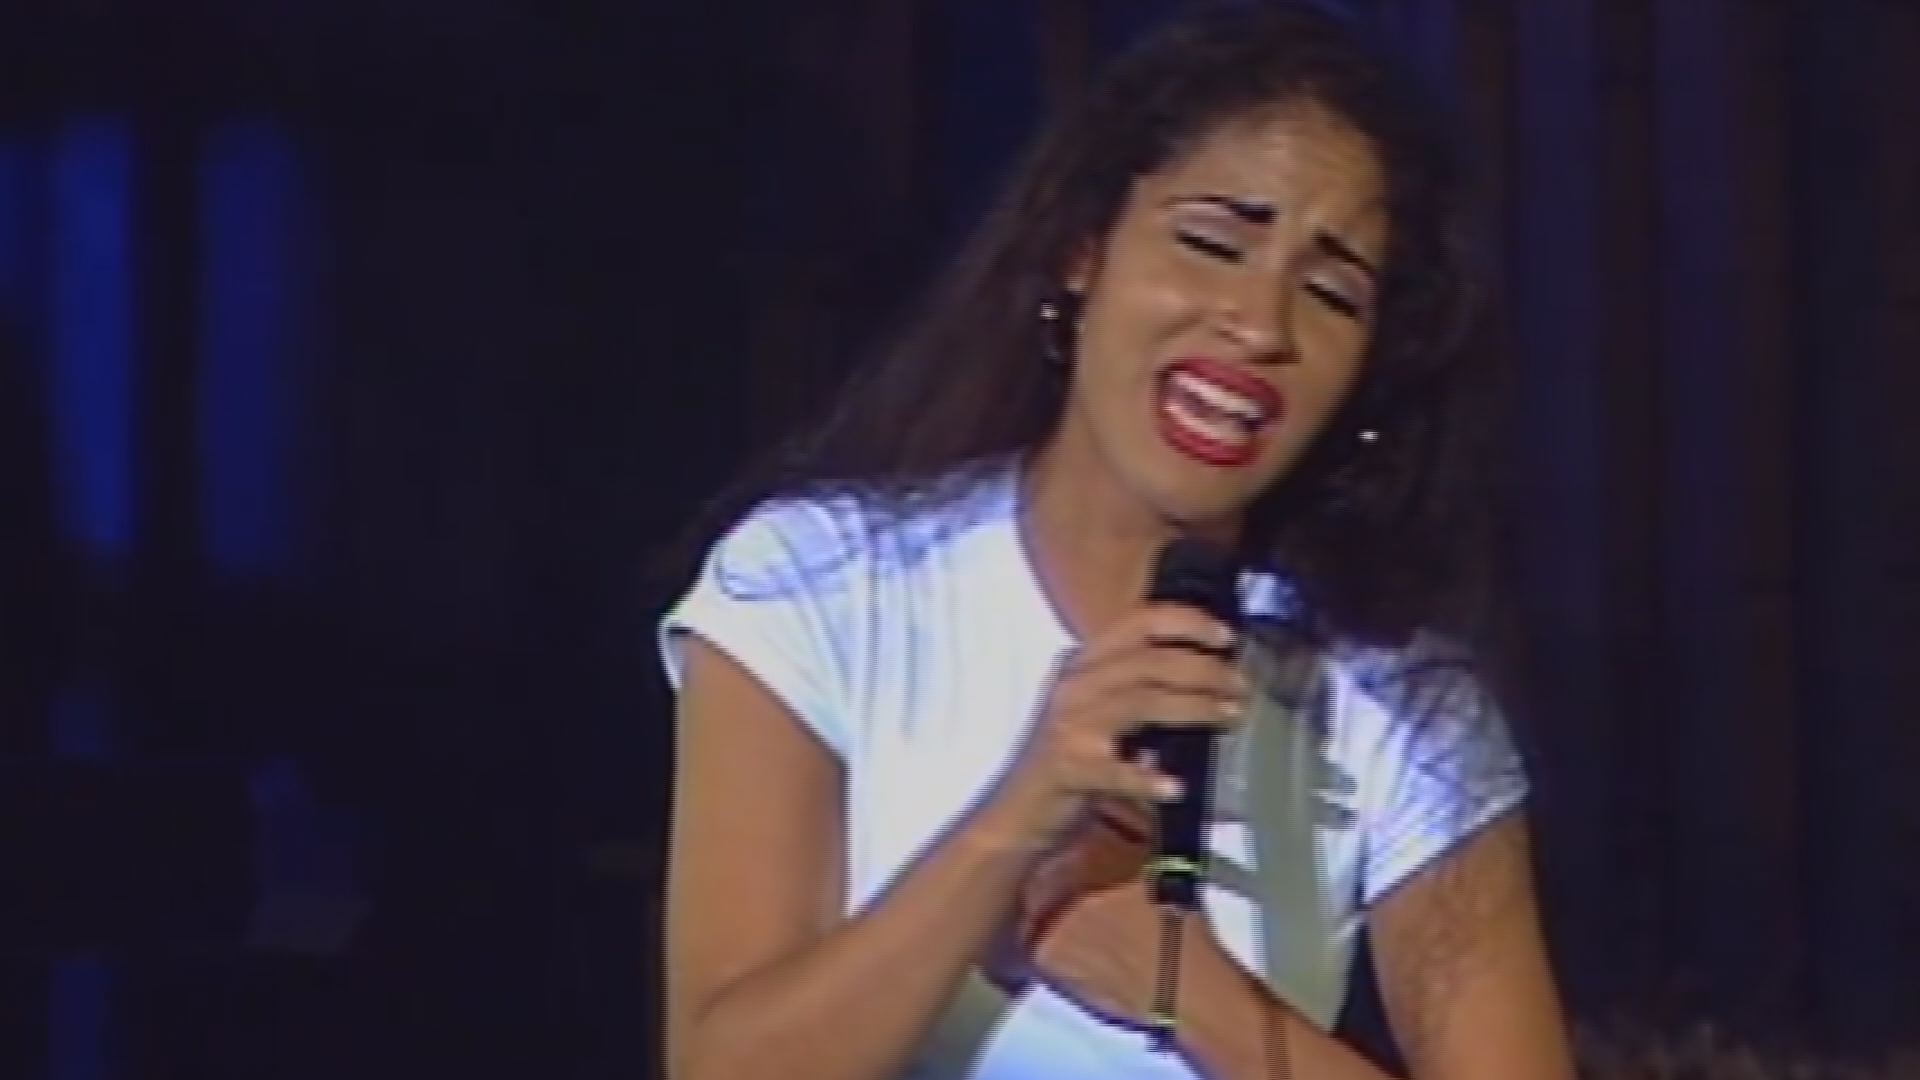 12news.com | Examining the rise and death of Selena, the 'Queen of Tejano'1920 x 1080